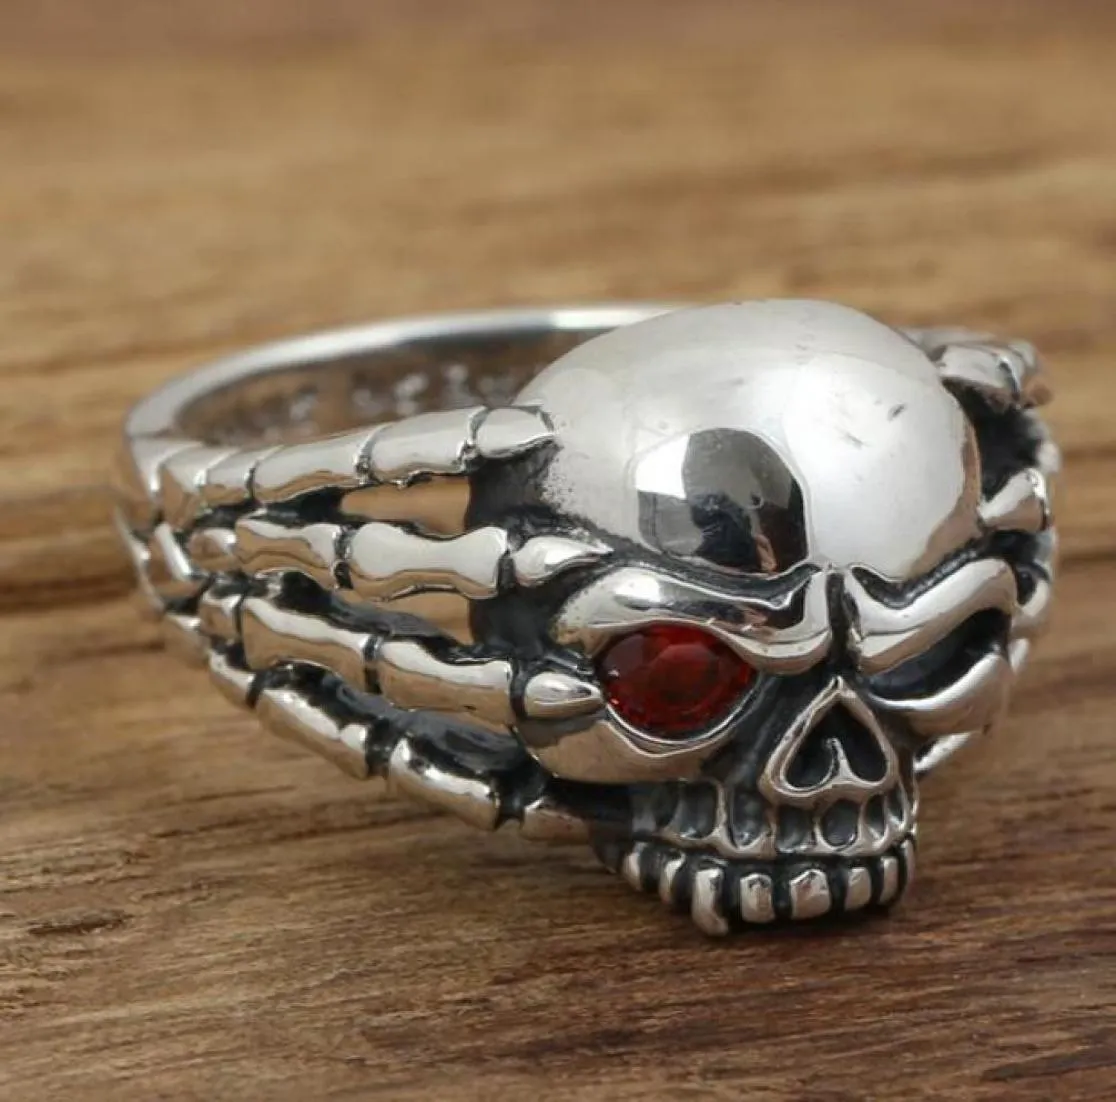 Cluster Anneaux 925 Sterling Silver Skull Claw Men039s Ring Jewelry Men Gift A2121748090